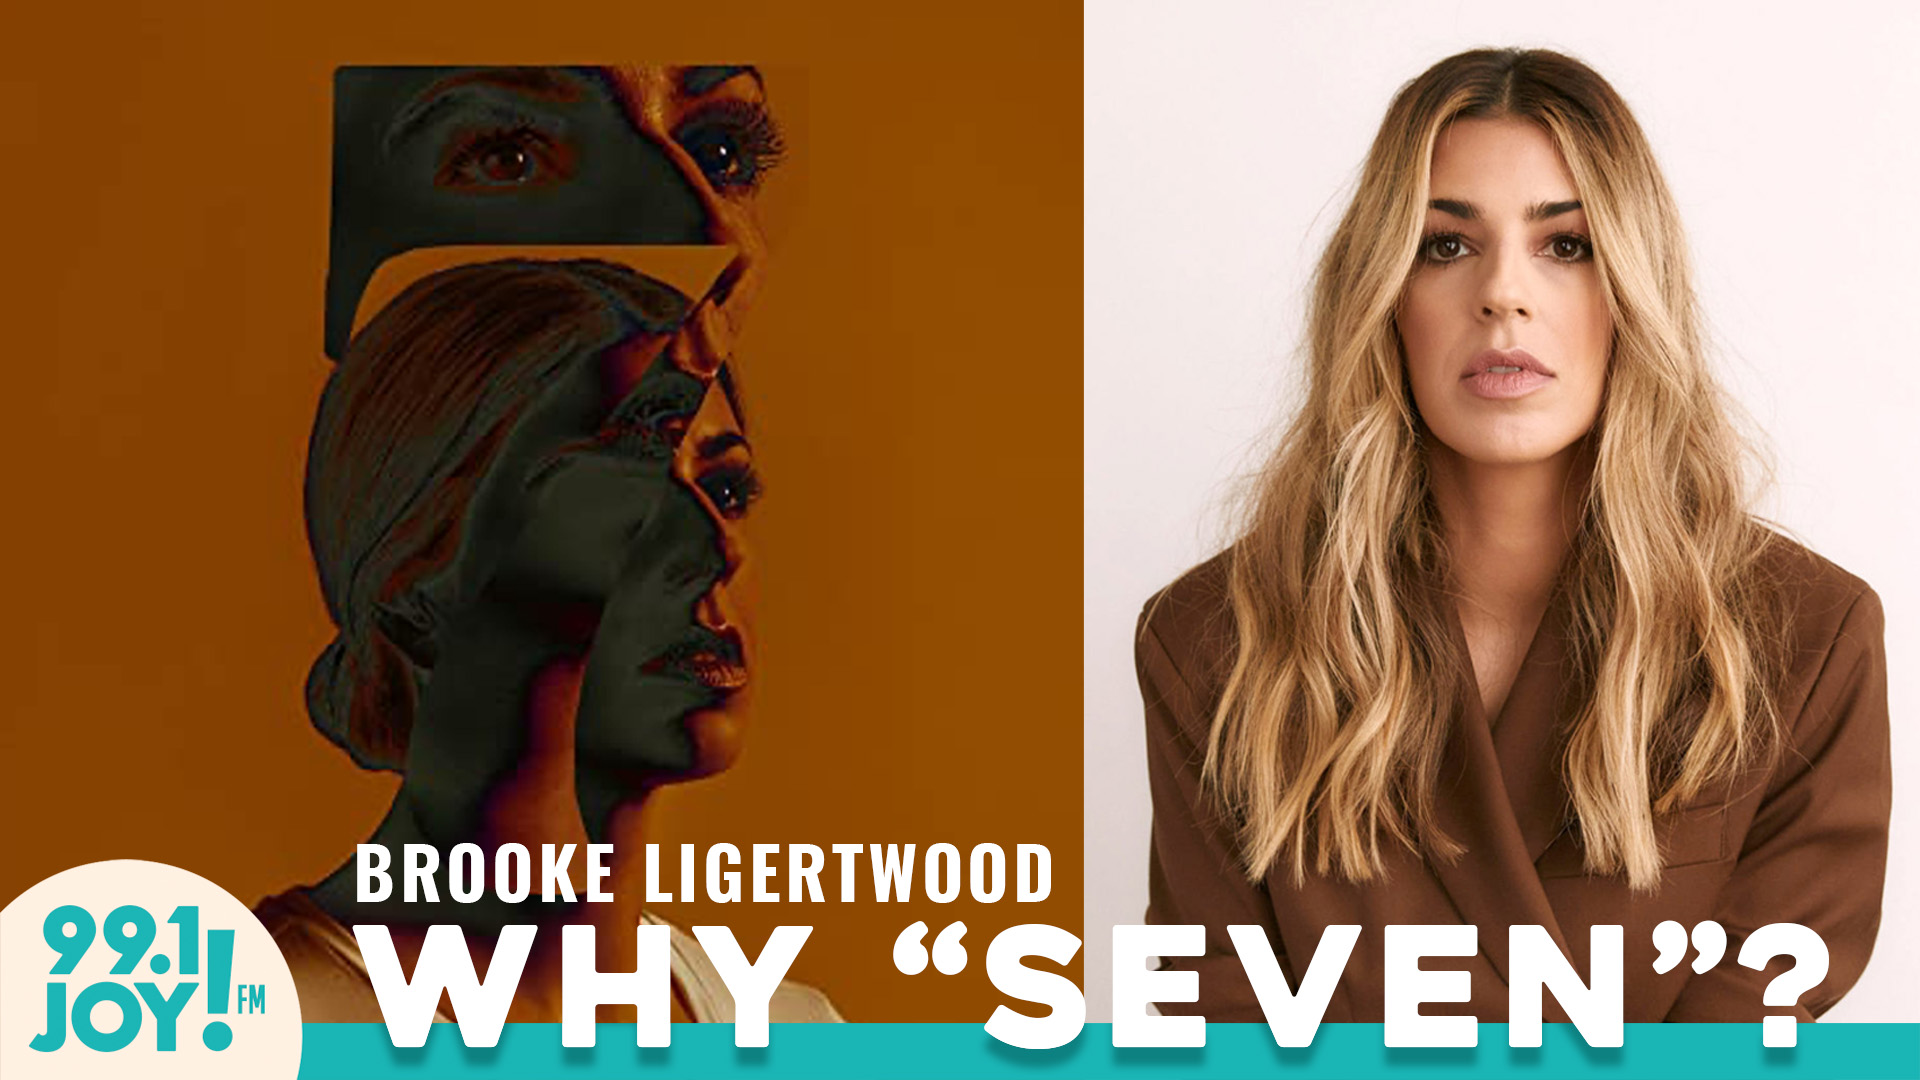 Brooke Ligertwood’s “SEVEN” and the AMAZING meaning behind the album name